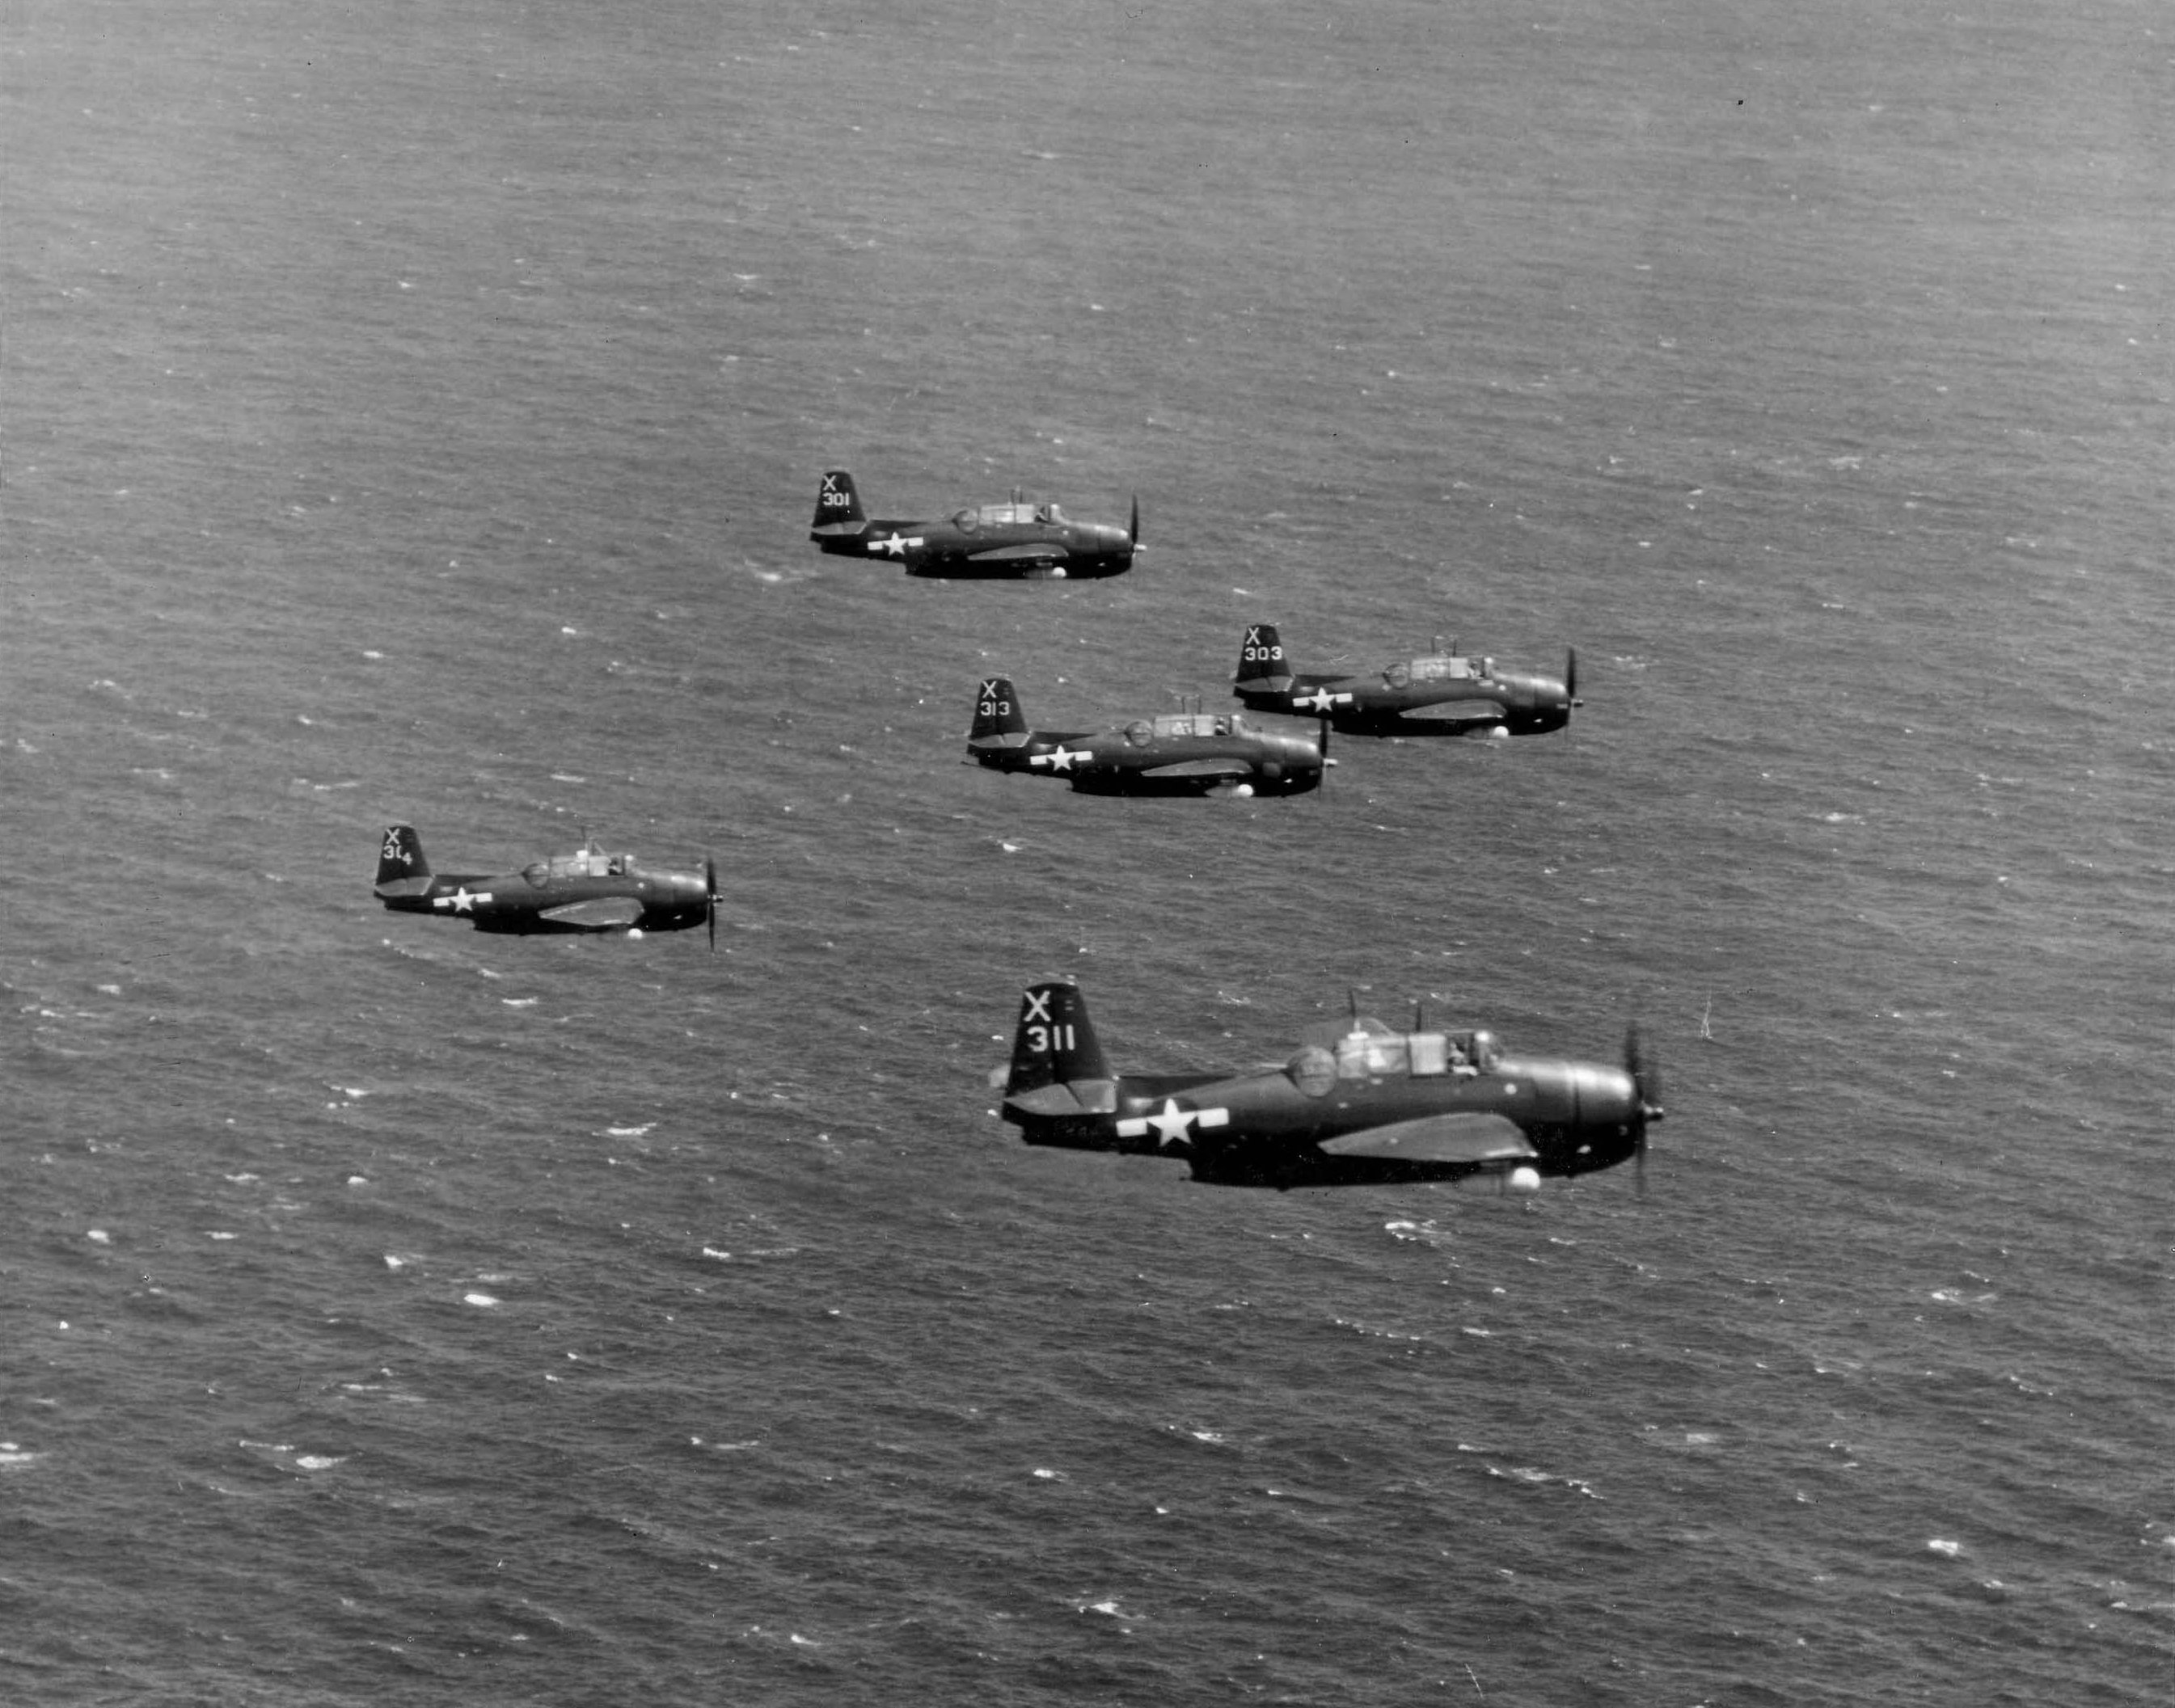 TBM-3 Avengers of Torpedo Squadron VT-86 flying from USS Wasp (Essex-class), late Aug 1945